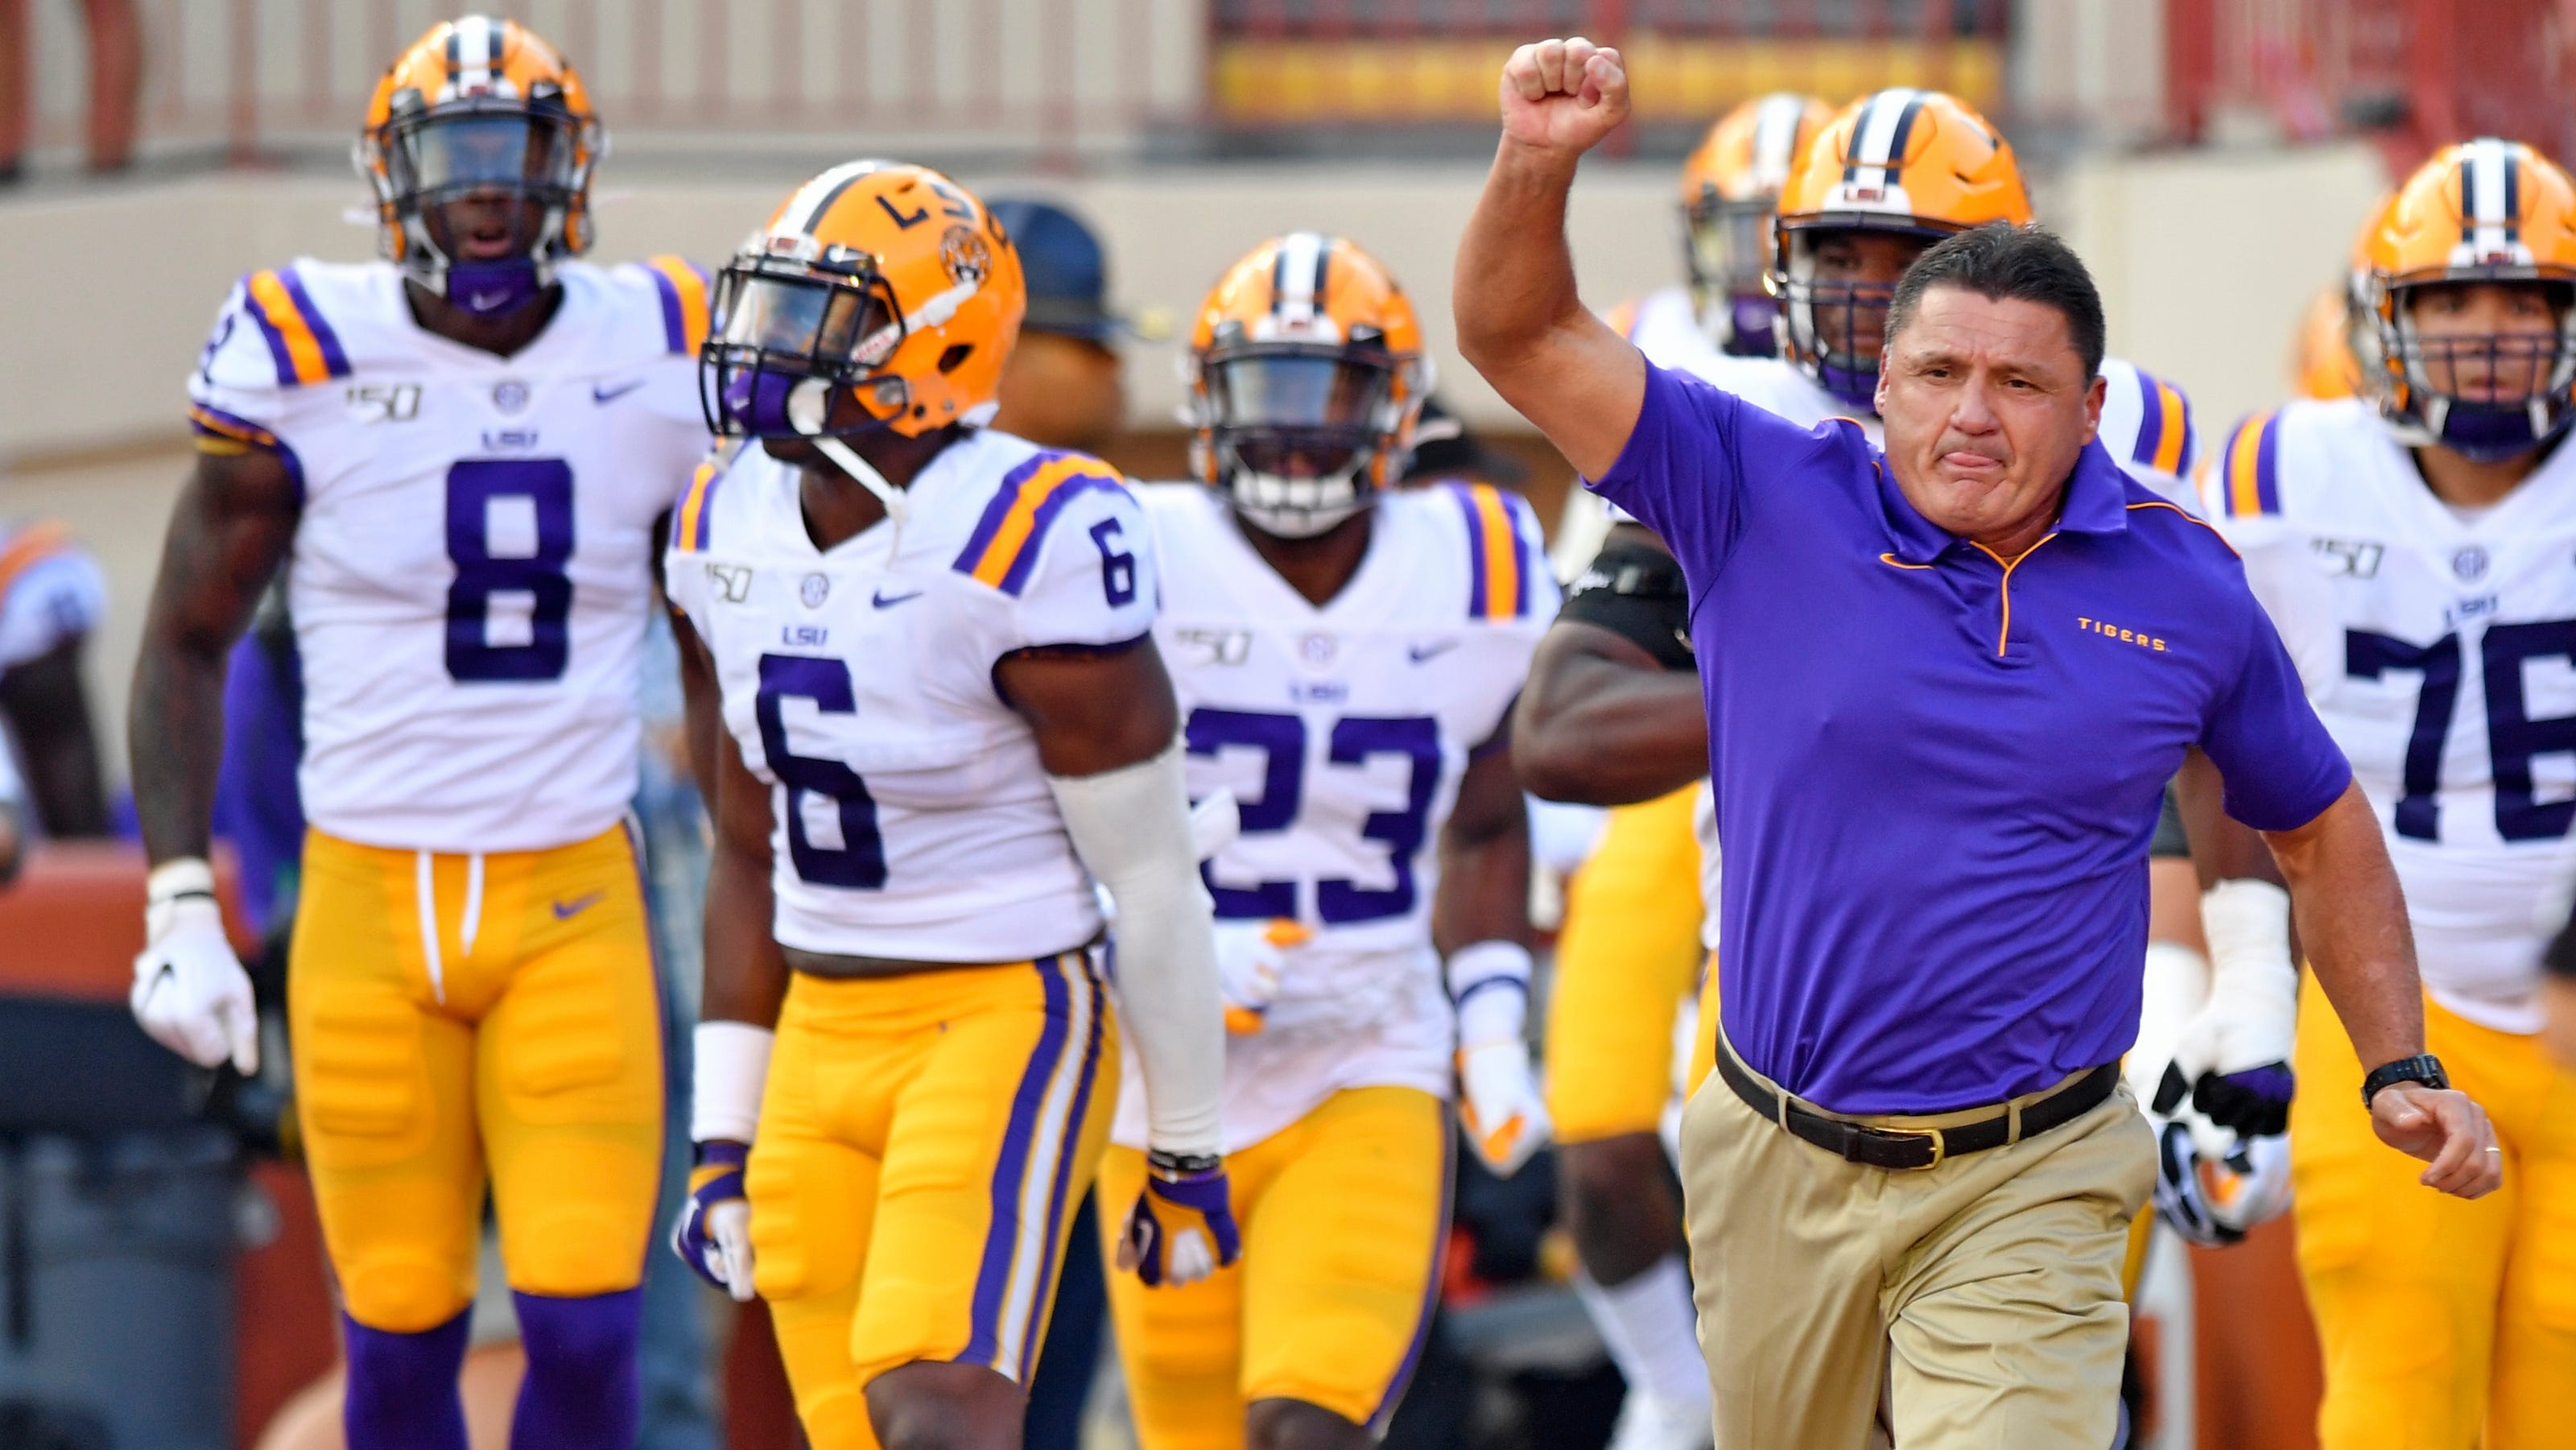 LSU football to schedule first game vs. Southern University in 2022